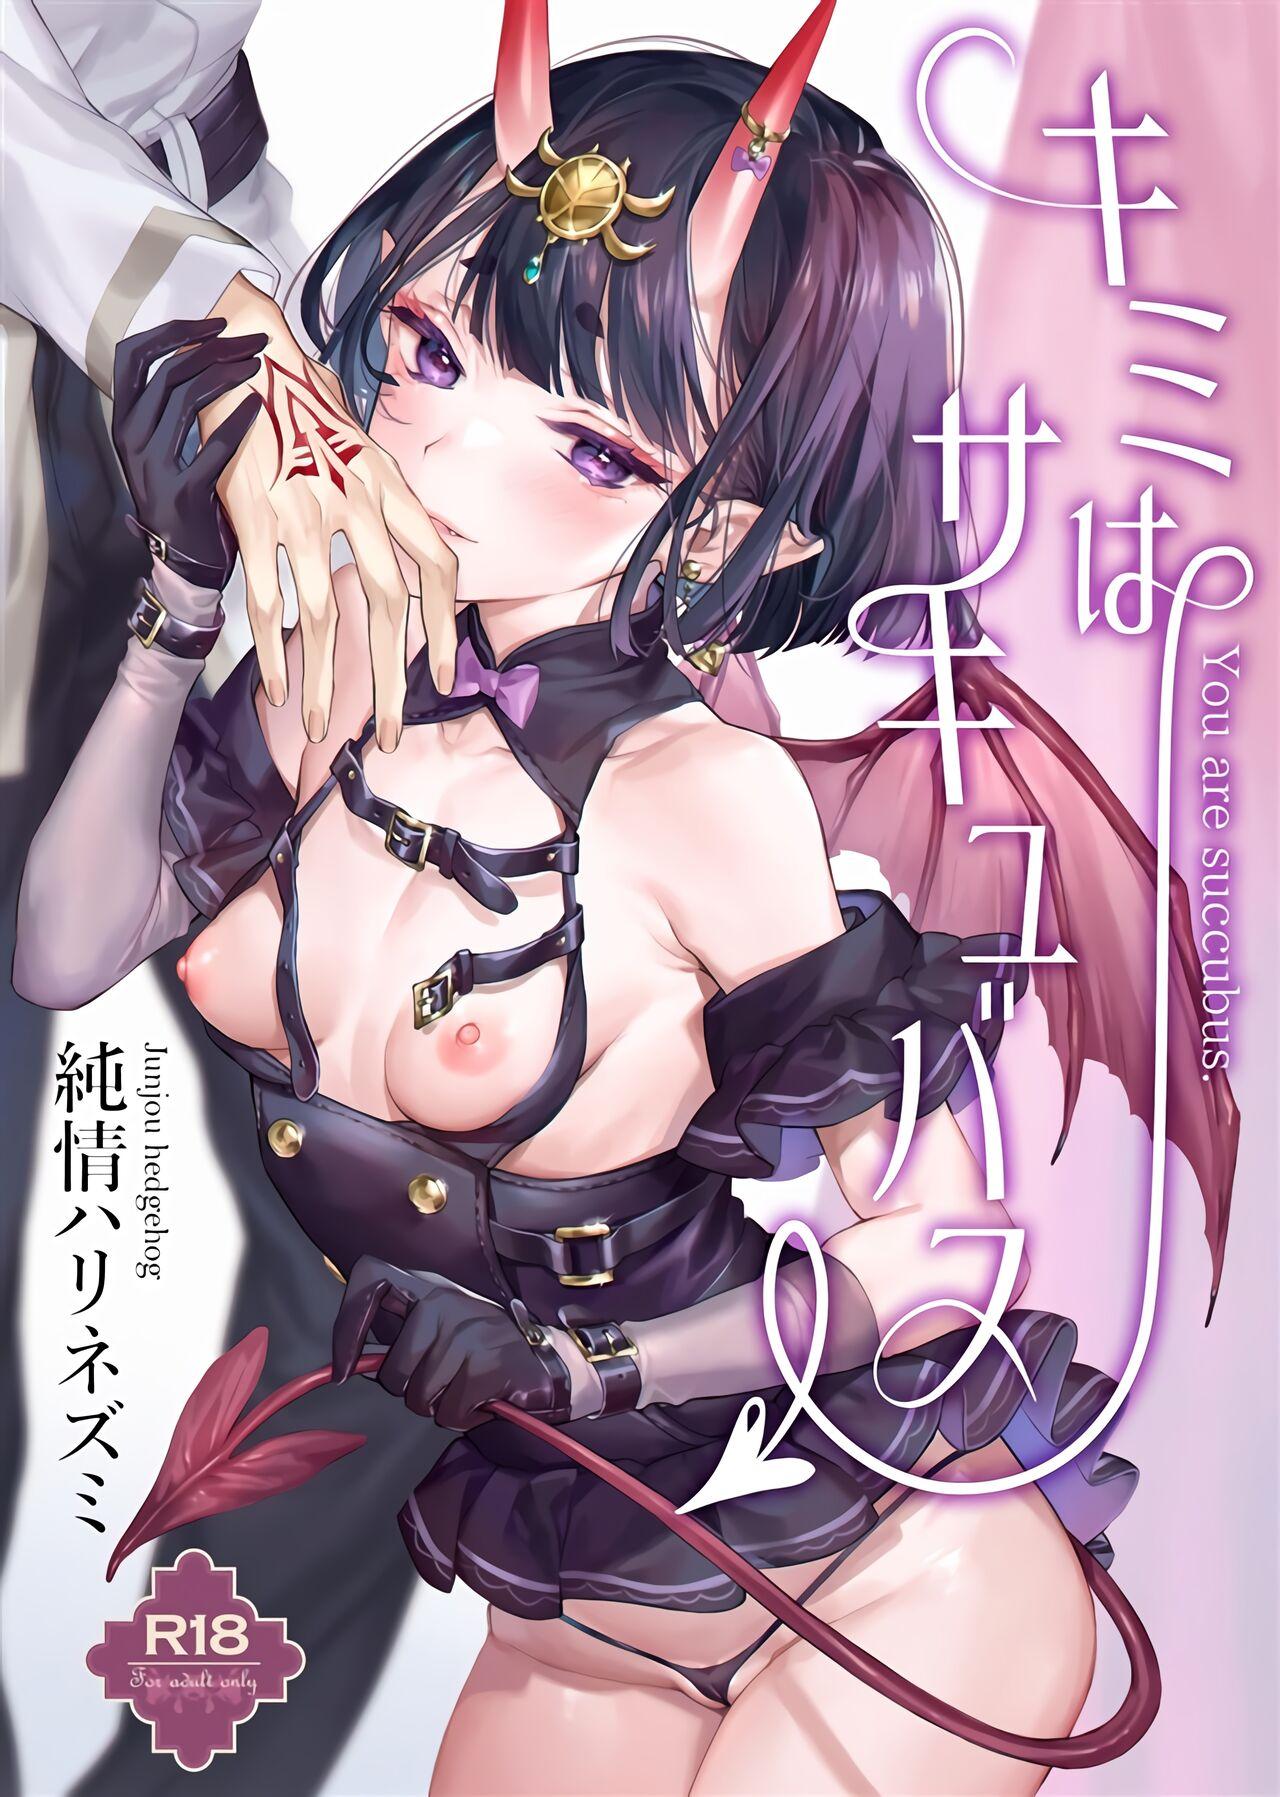 Gay Studs Kimi wa Succubus - Fate grand order Stepdaughter - Page 1